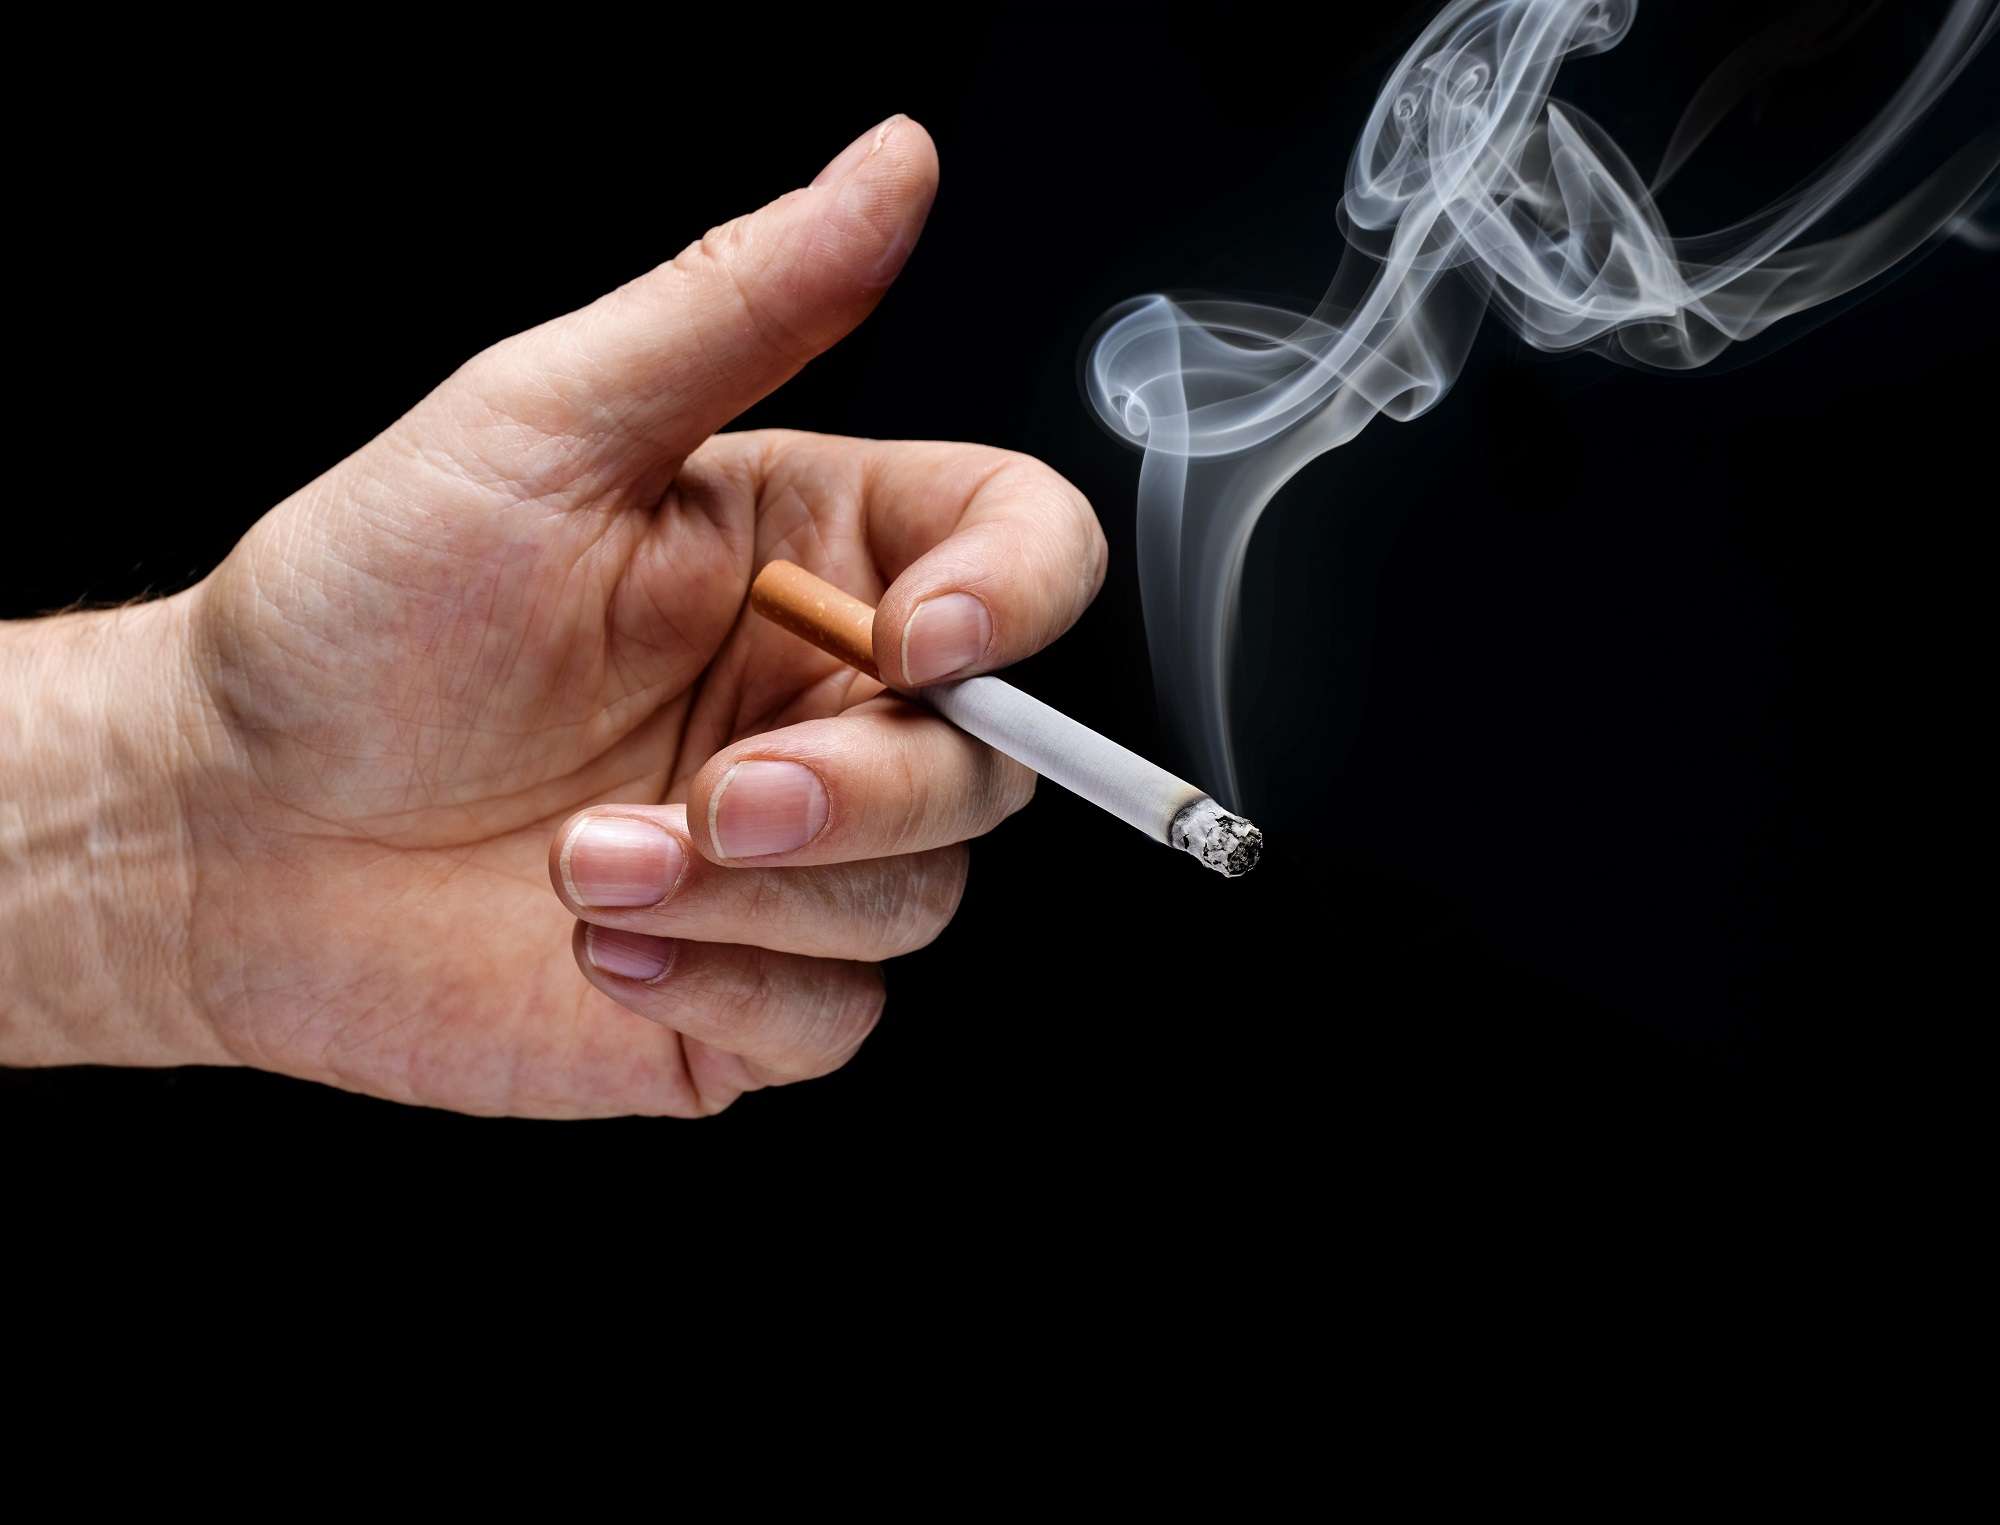 Smoking Identified as Risk Factor for Colorectal Cancer in Patients ...